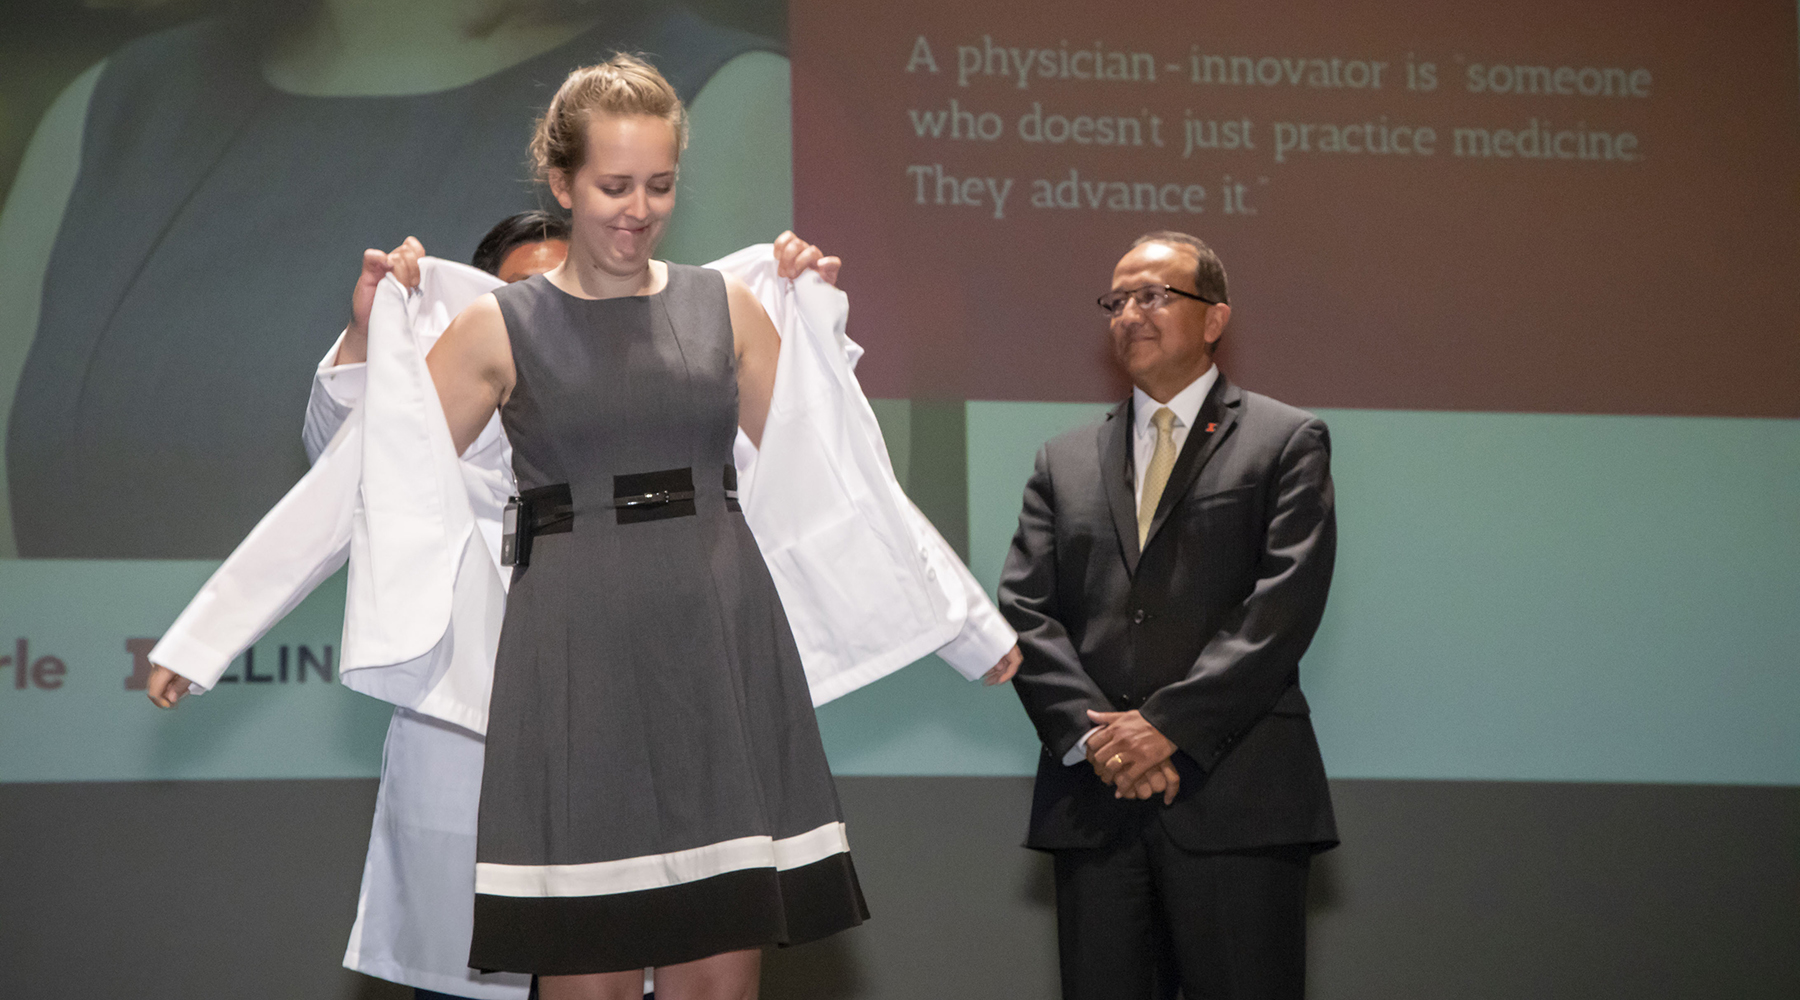 In a July ceremony, Elizabeth Woodburn receives her white coat, signifying that she is a physician-in-training, from dean King Li and executive associate dean Rashid Bashir. Photo by L. Brian Stauffer